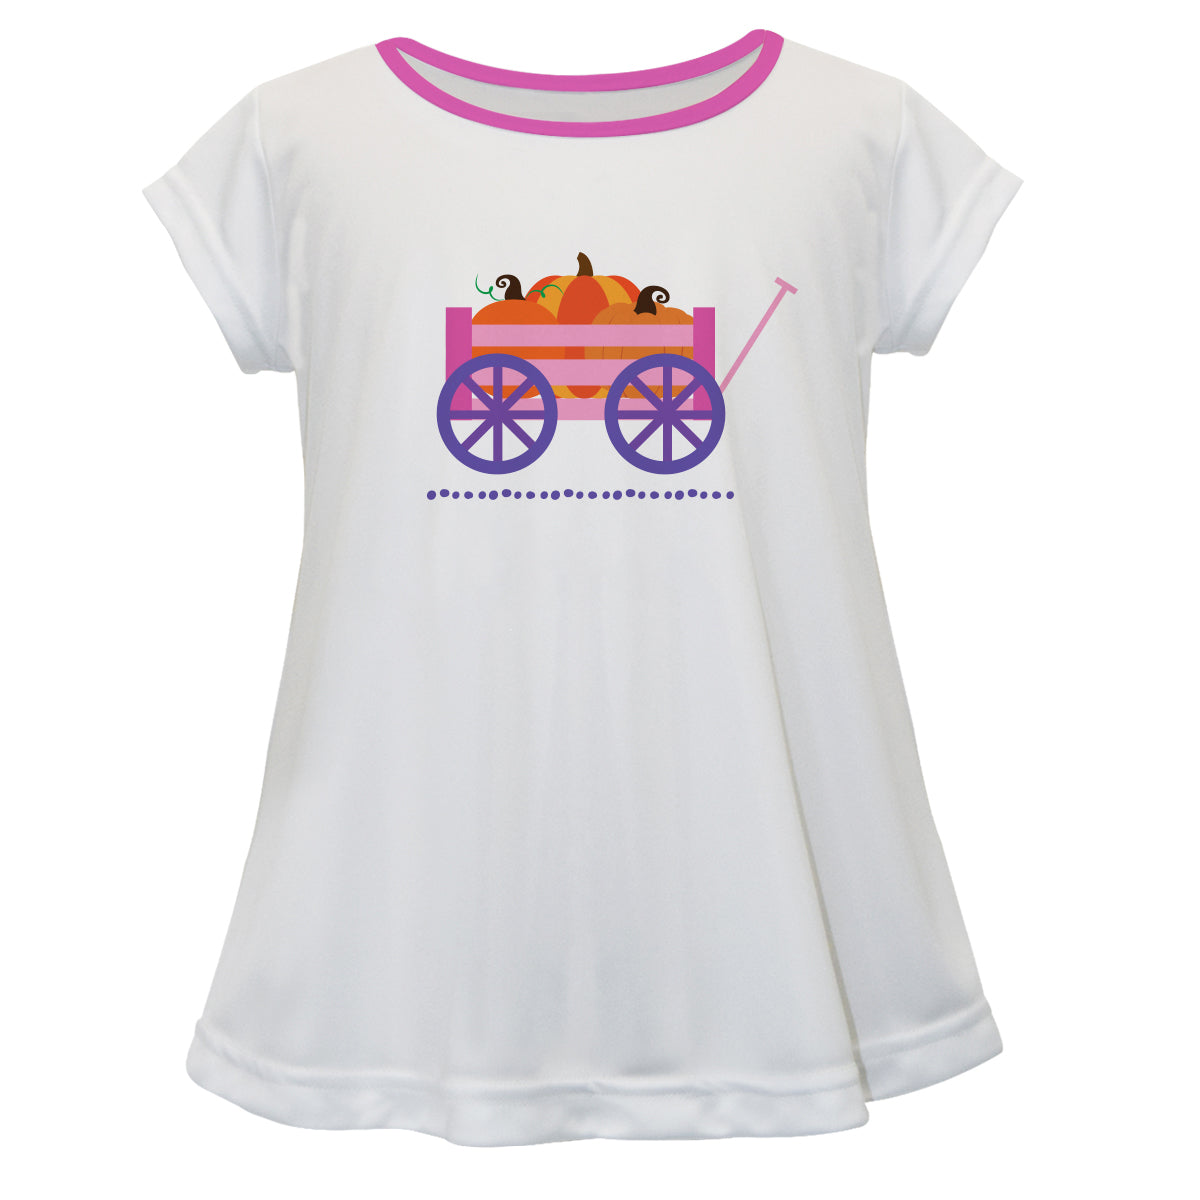 Girls white pumpkins blouse with name - Wimziy&Co.